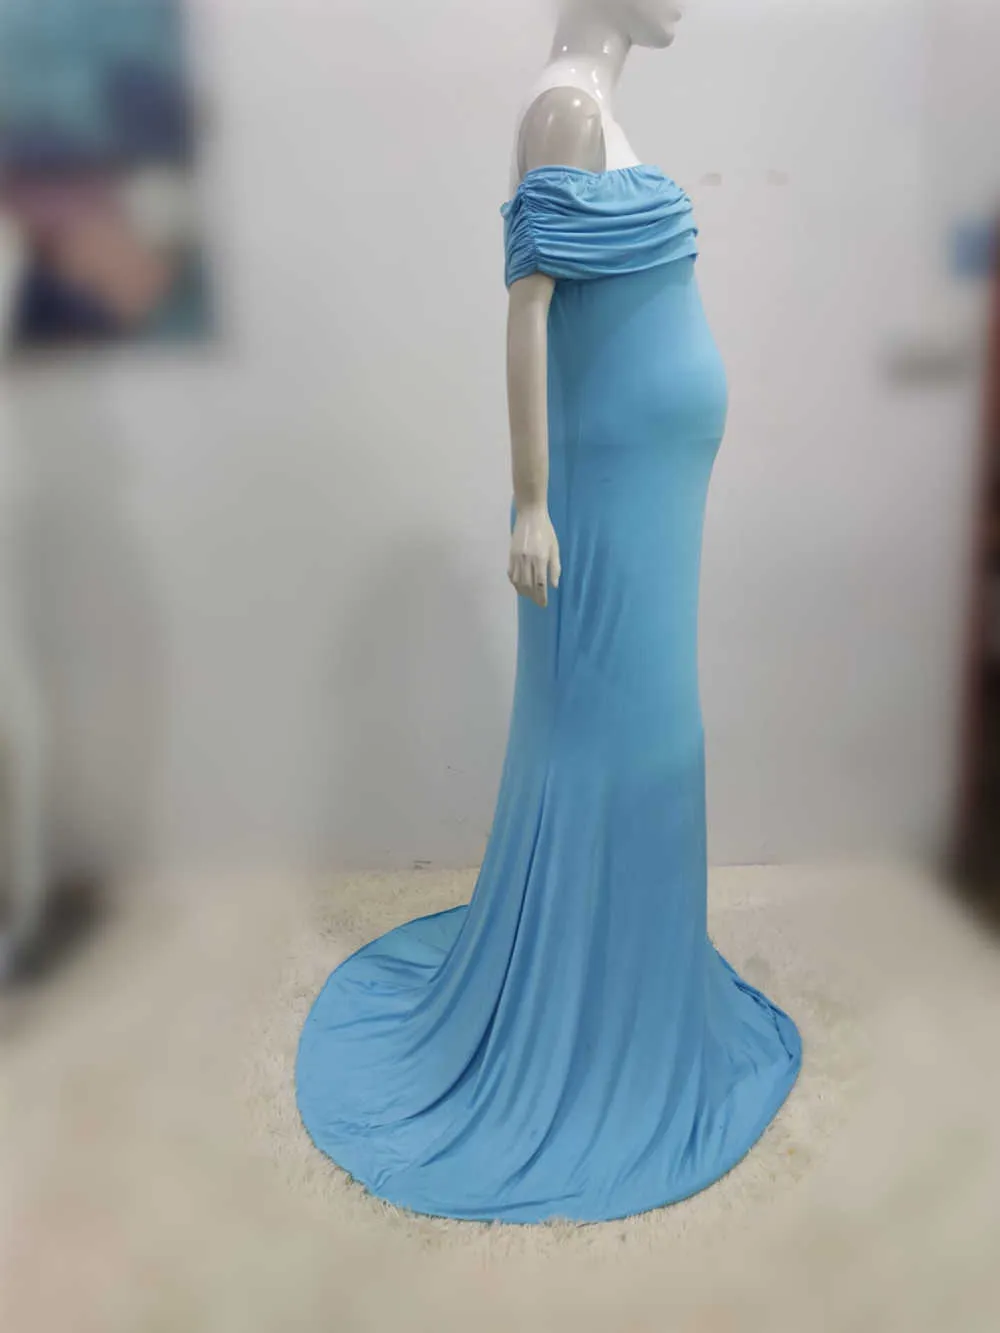 Shoulderless Maternity Dresses Photography Props Long Pregnancy Dress For Baby Shower Photo Shoots Pregnant Women Maxi Gown 2020 (8)